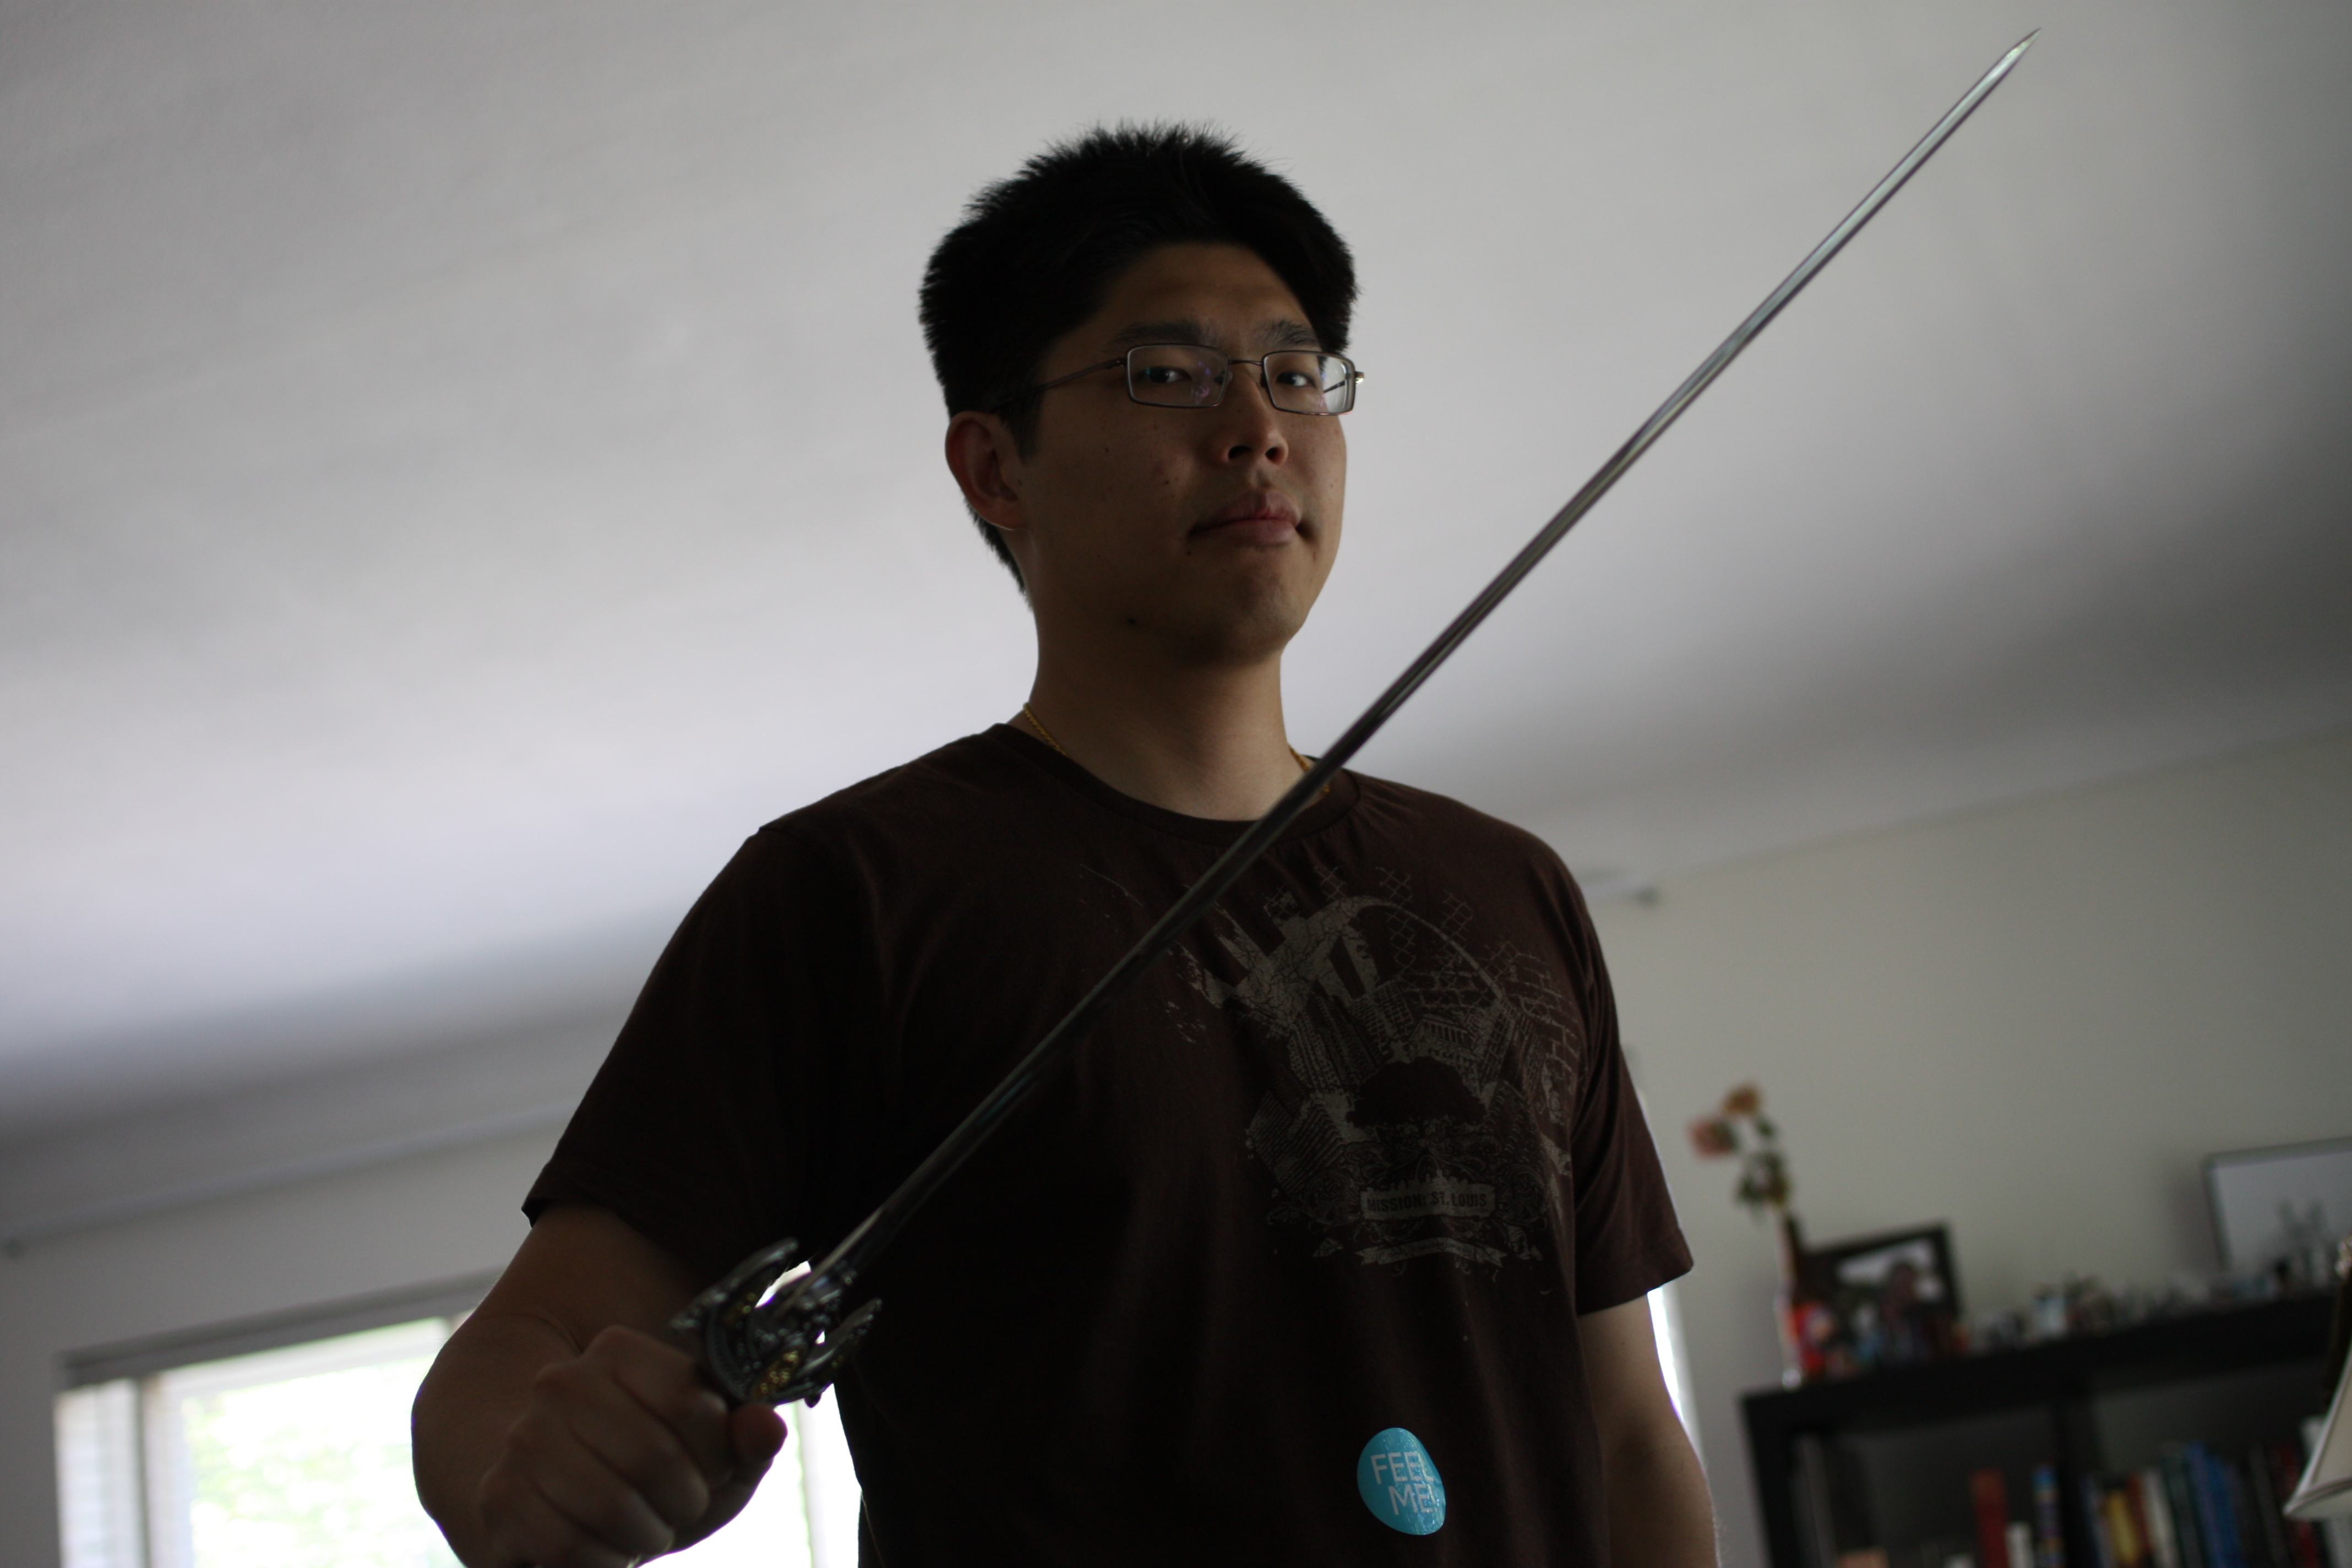 my brother with a sword